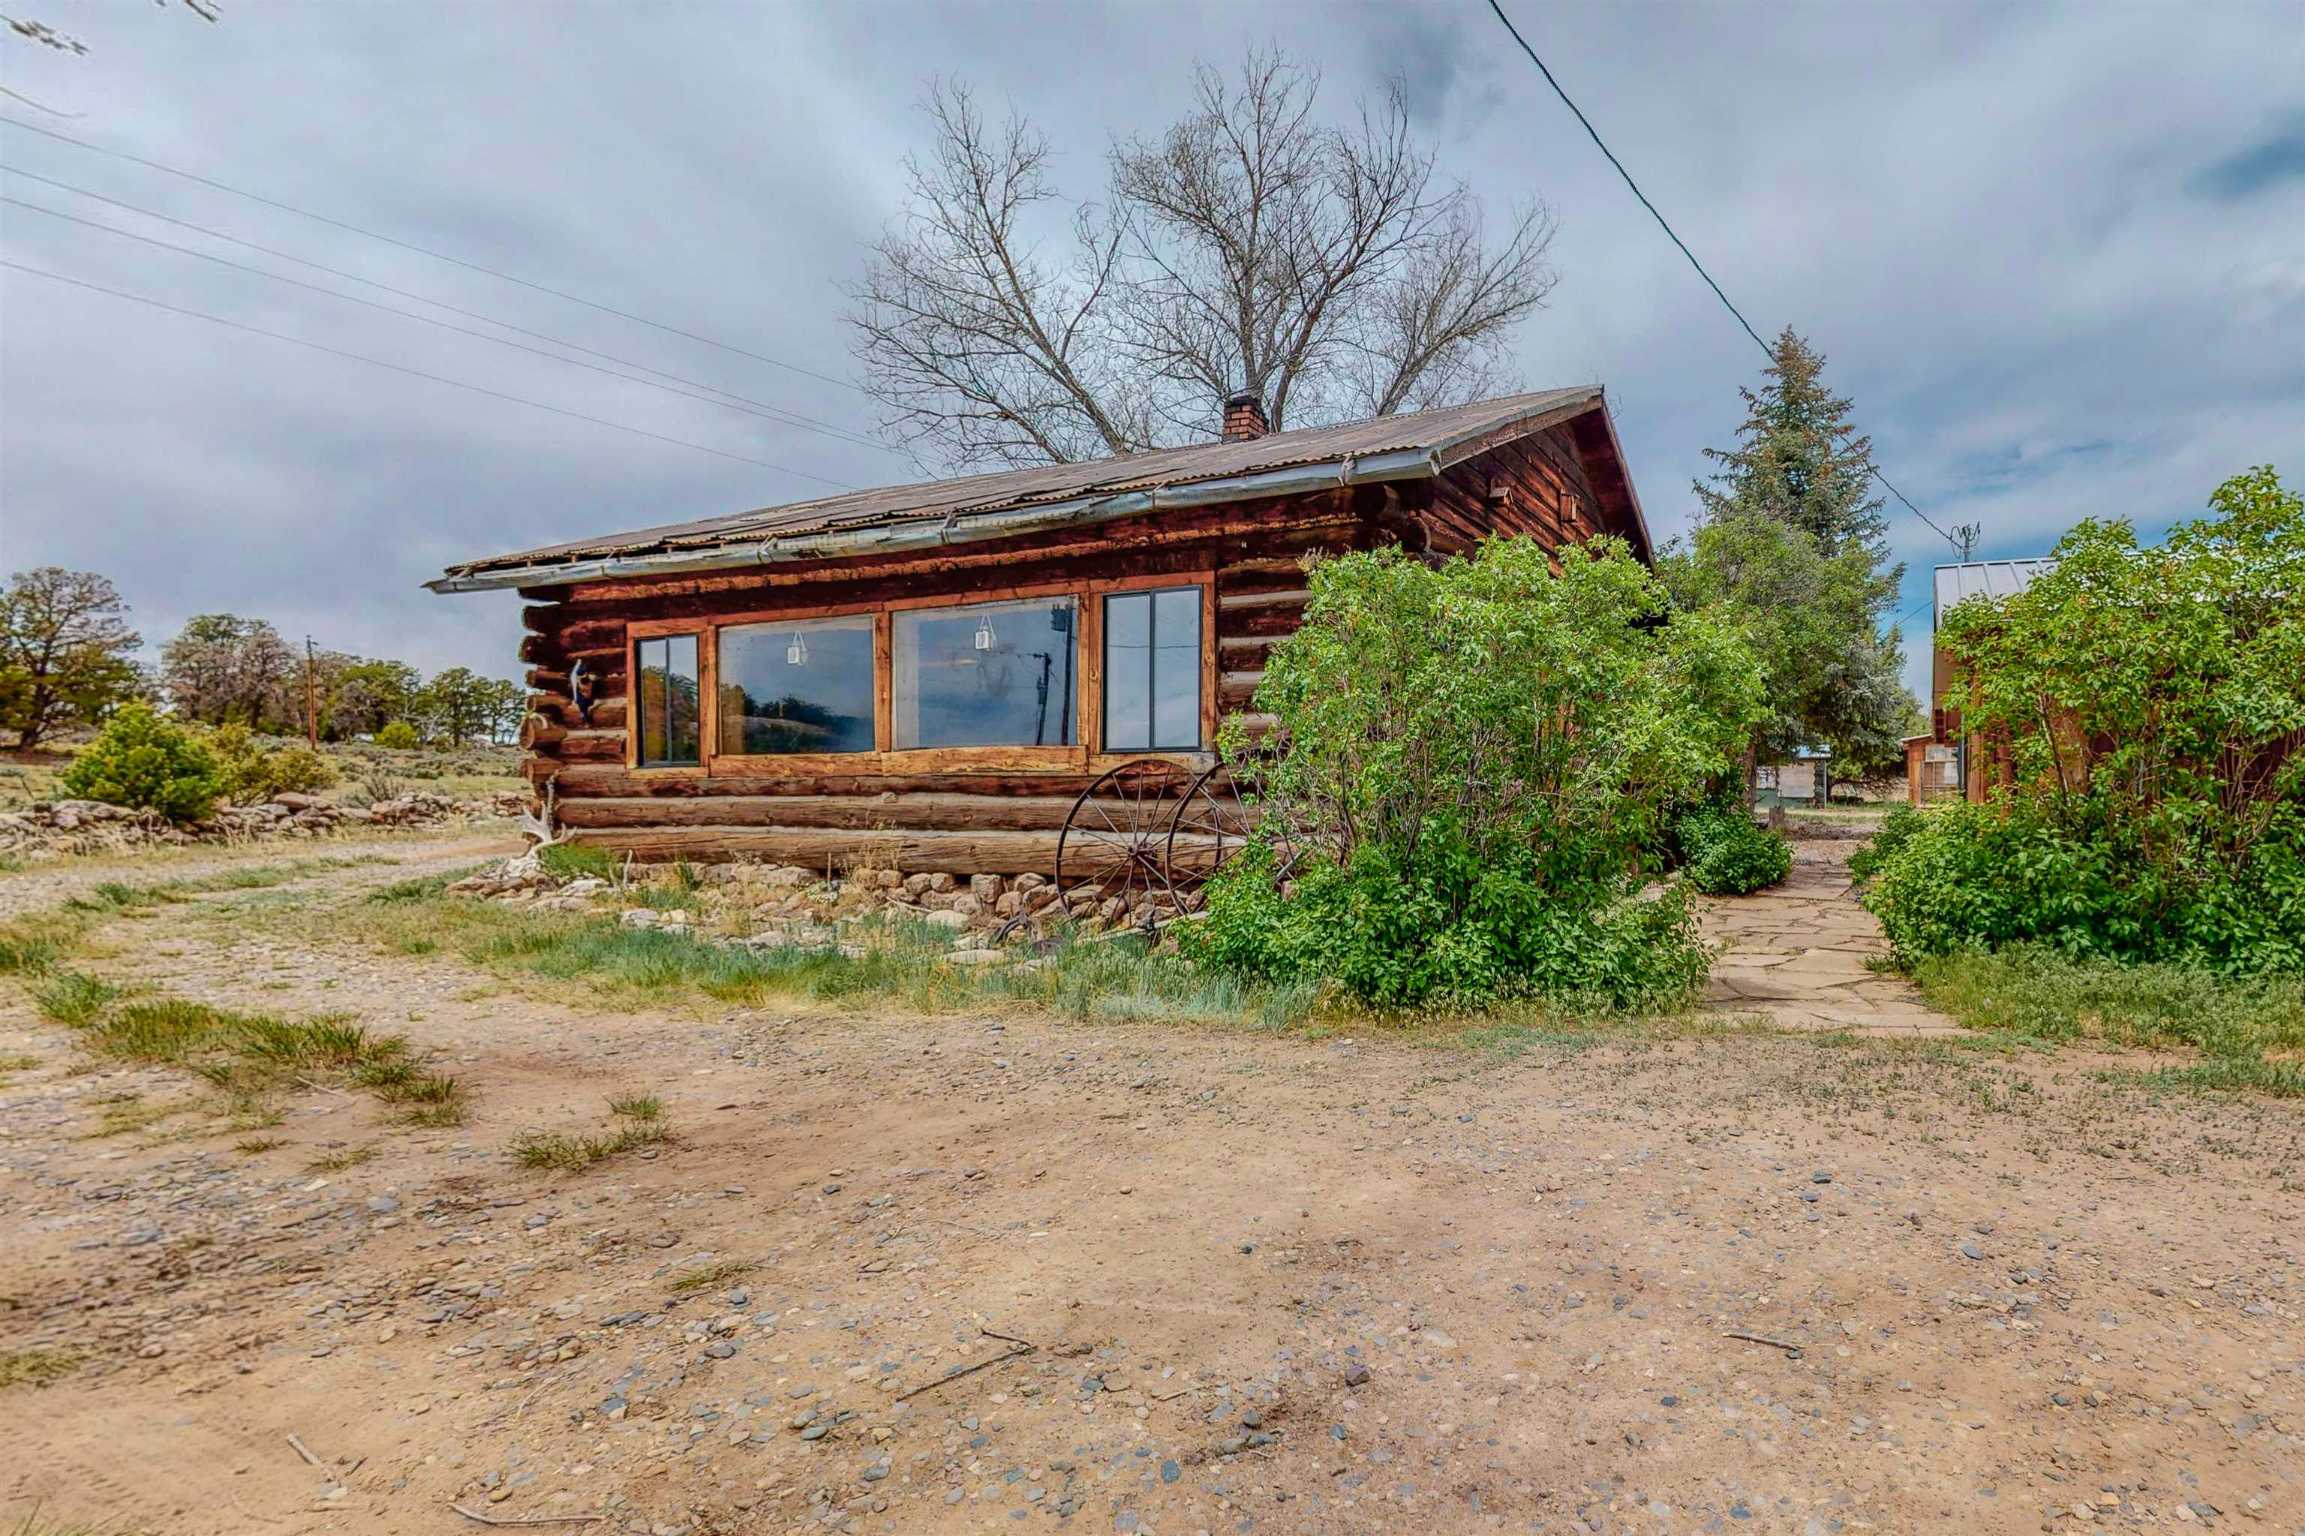 1711 NM 595, Lindrith, New Mexico 87029, 4 Bedrooms Bedrooms, ,1 BathroomBathrooms,Residential,For Sale,1711 NM 595,202201786